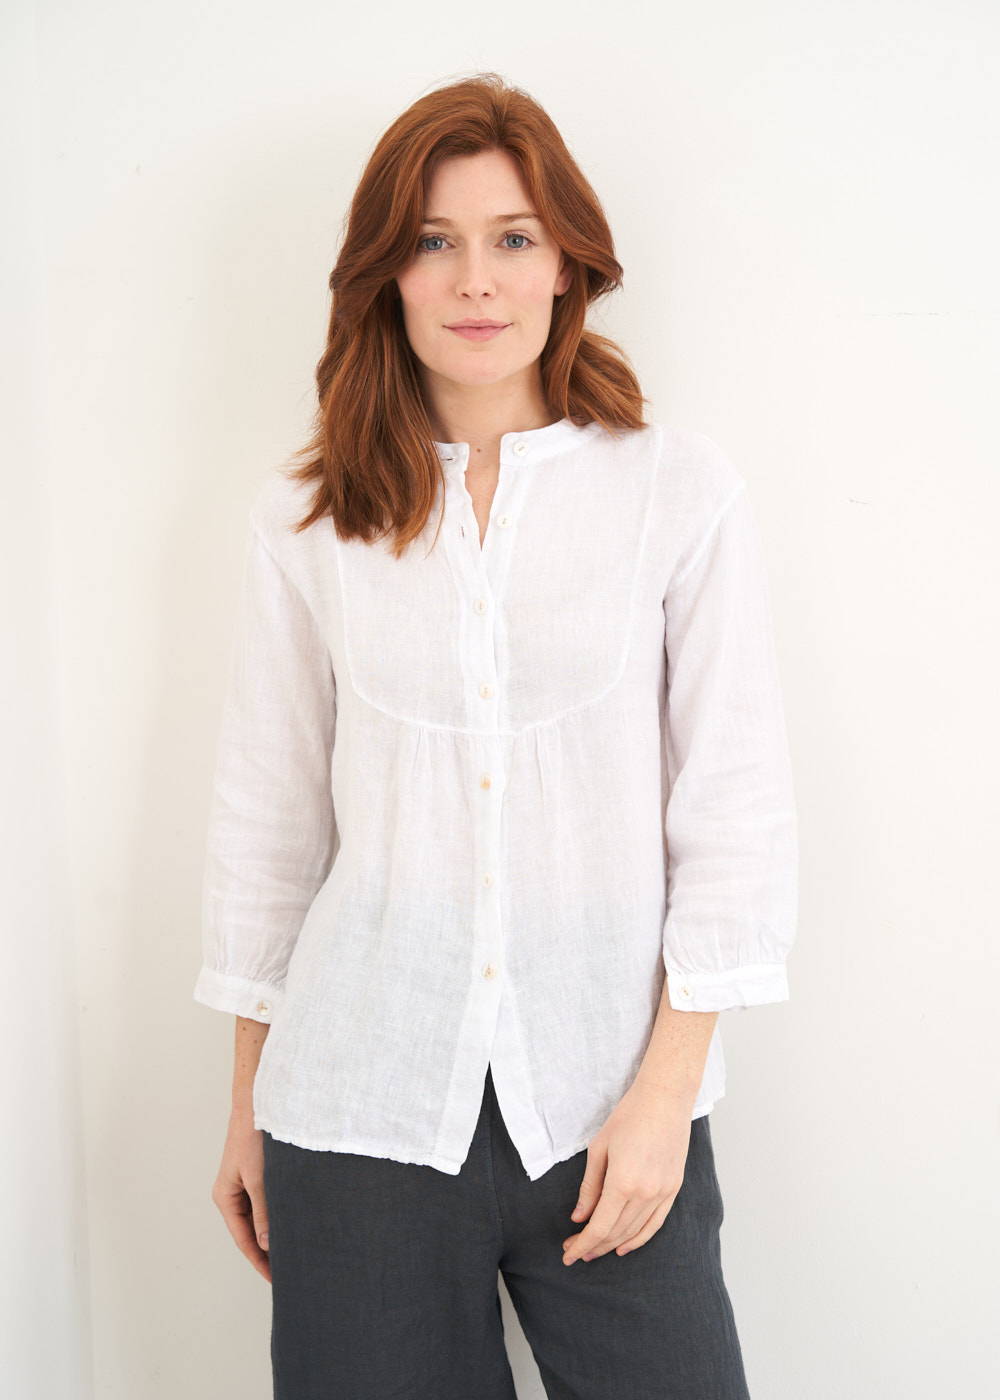 A model wearing a long sleeved white linen top with bib detail on the neckoine with black trousers and off white clogs